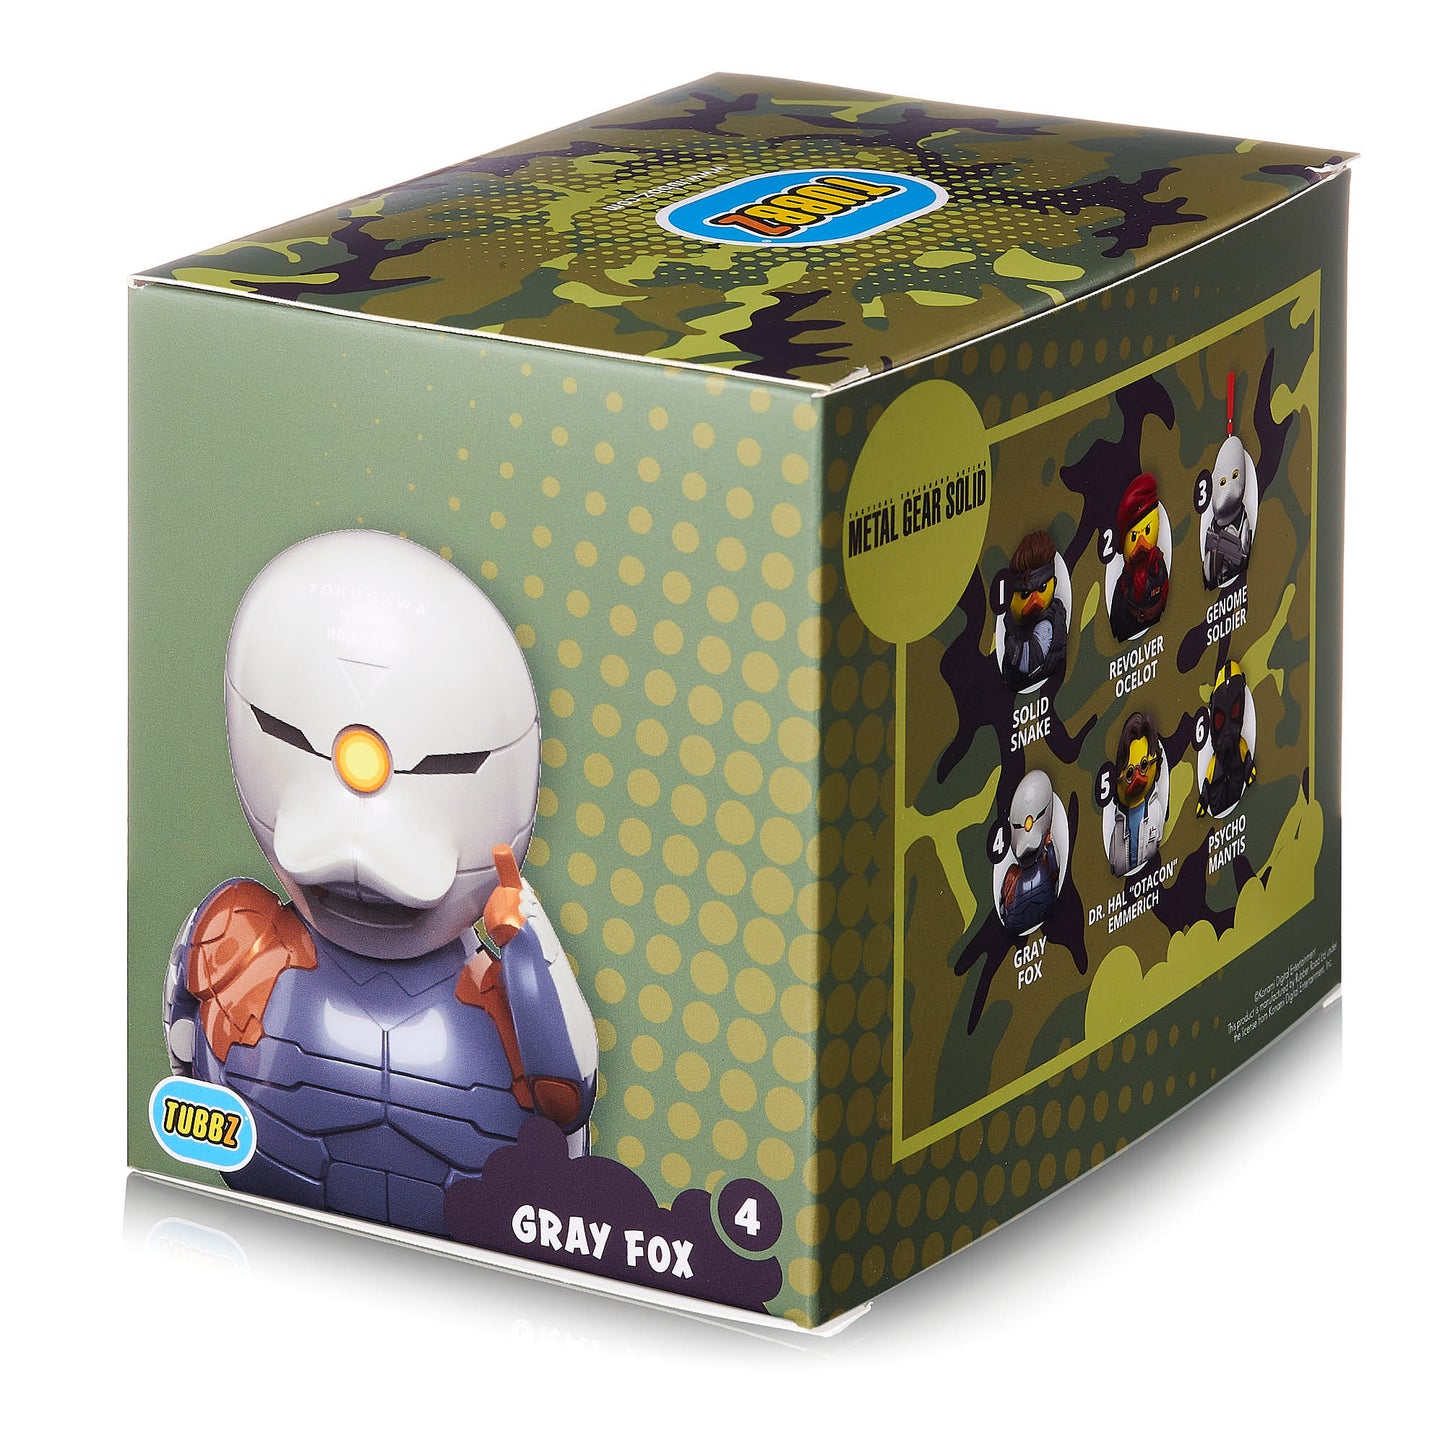 METAL GEAR SOLID GRAY FOX TUBBZ (BOXED EDITION) - KUWAIT